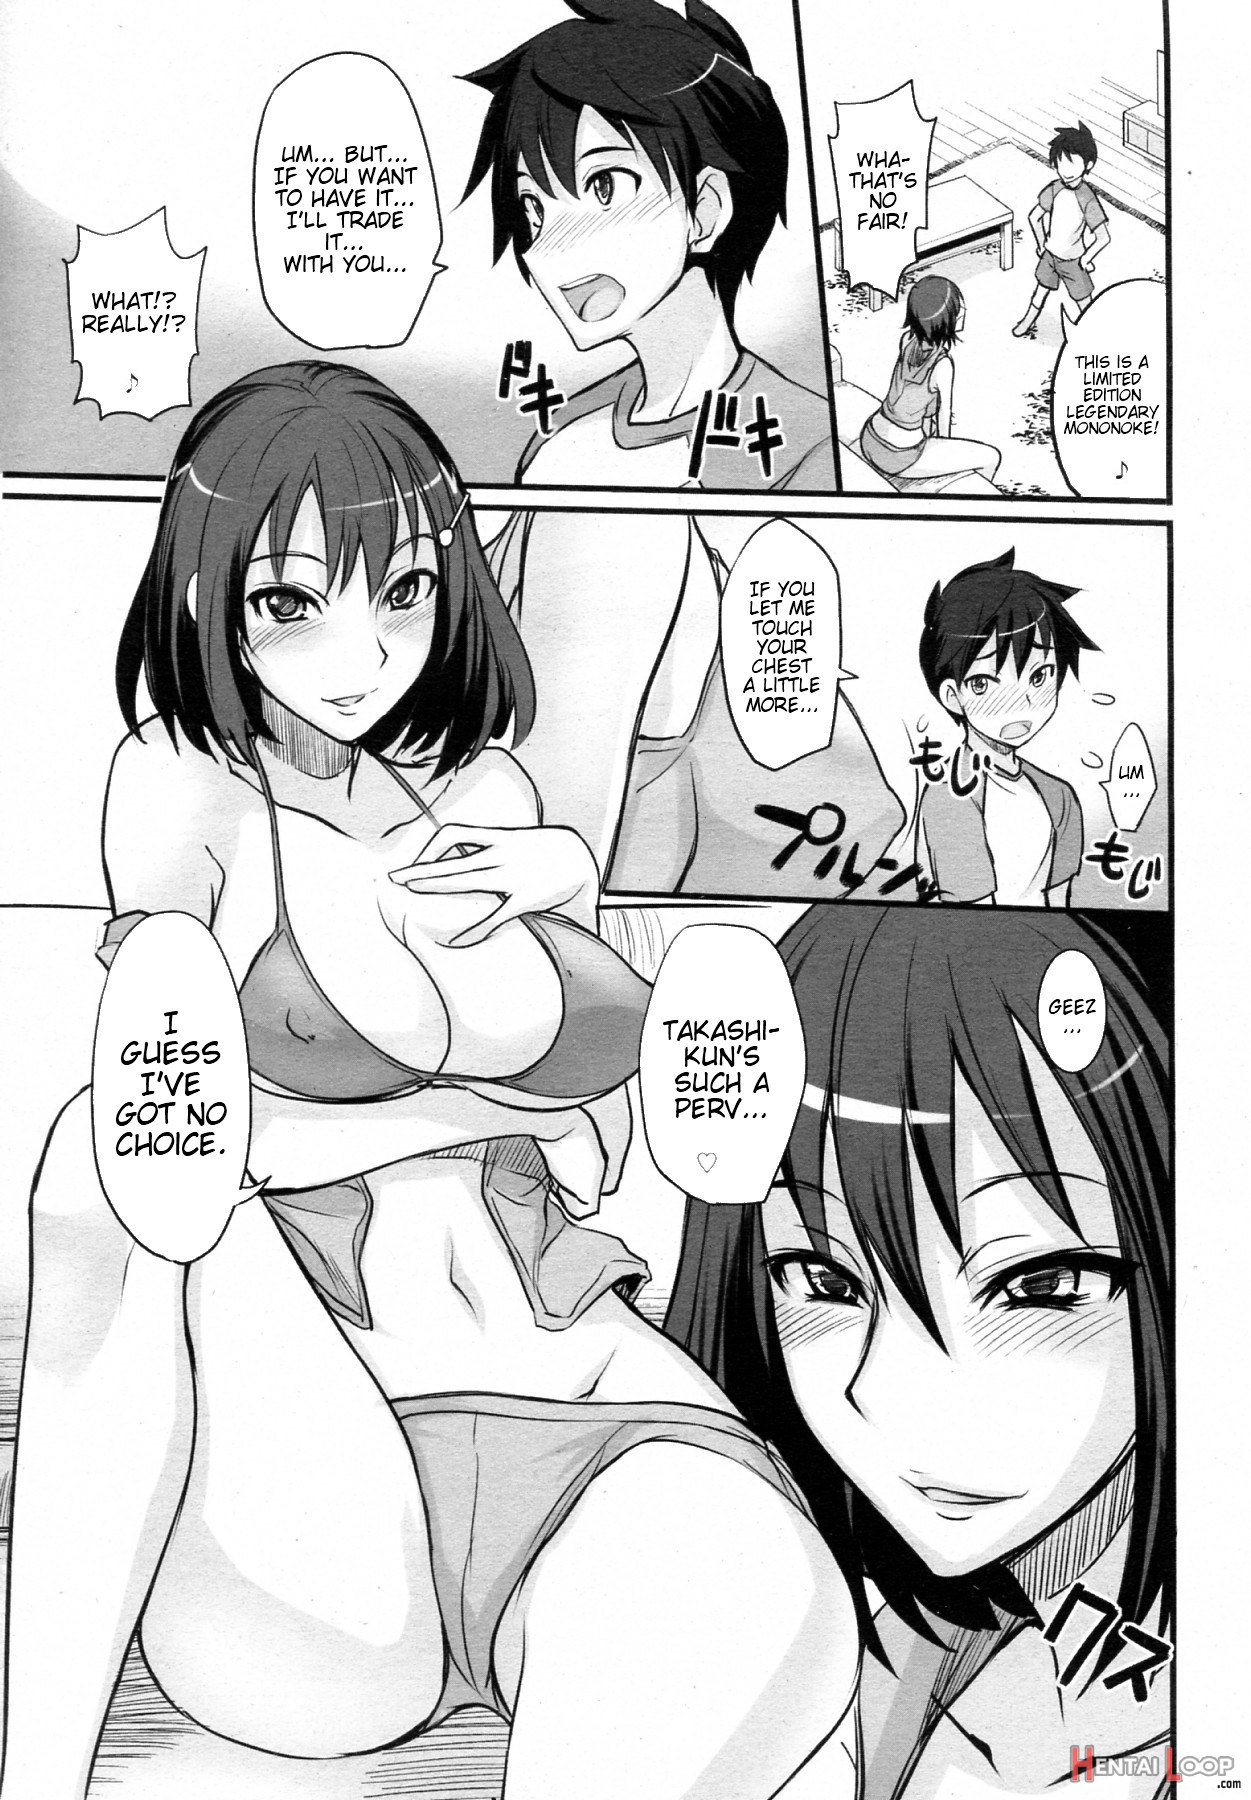 Game Shiyouze! - Decensored page 7